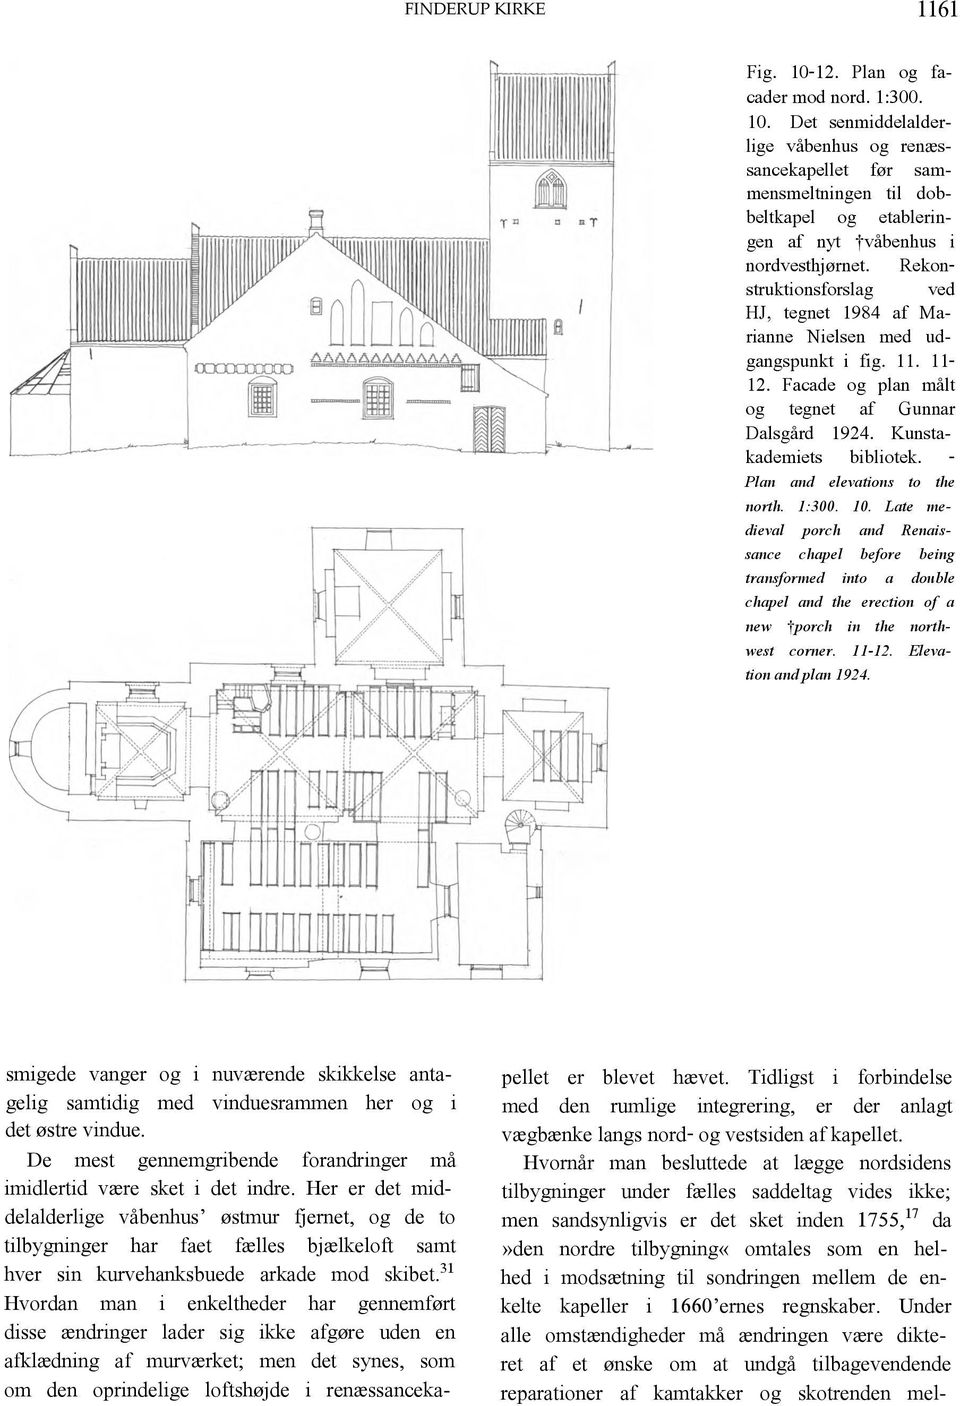 - Plan and elevations to the north. 1:300. 10. Late medieval porch and Renaissance chapel before being transformed into a double chapel and the erection of a new porch in the northwest corner. 11-12.